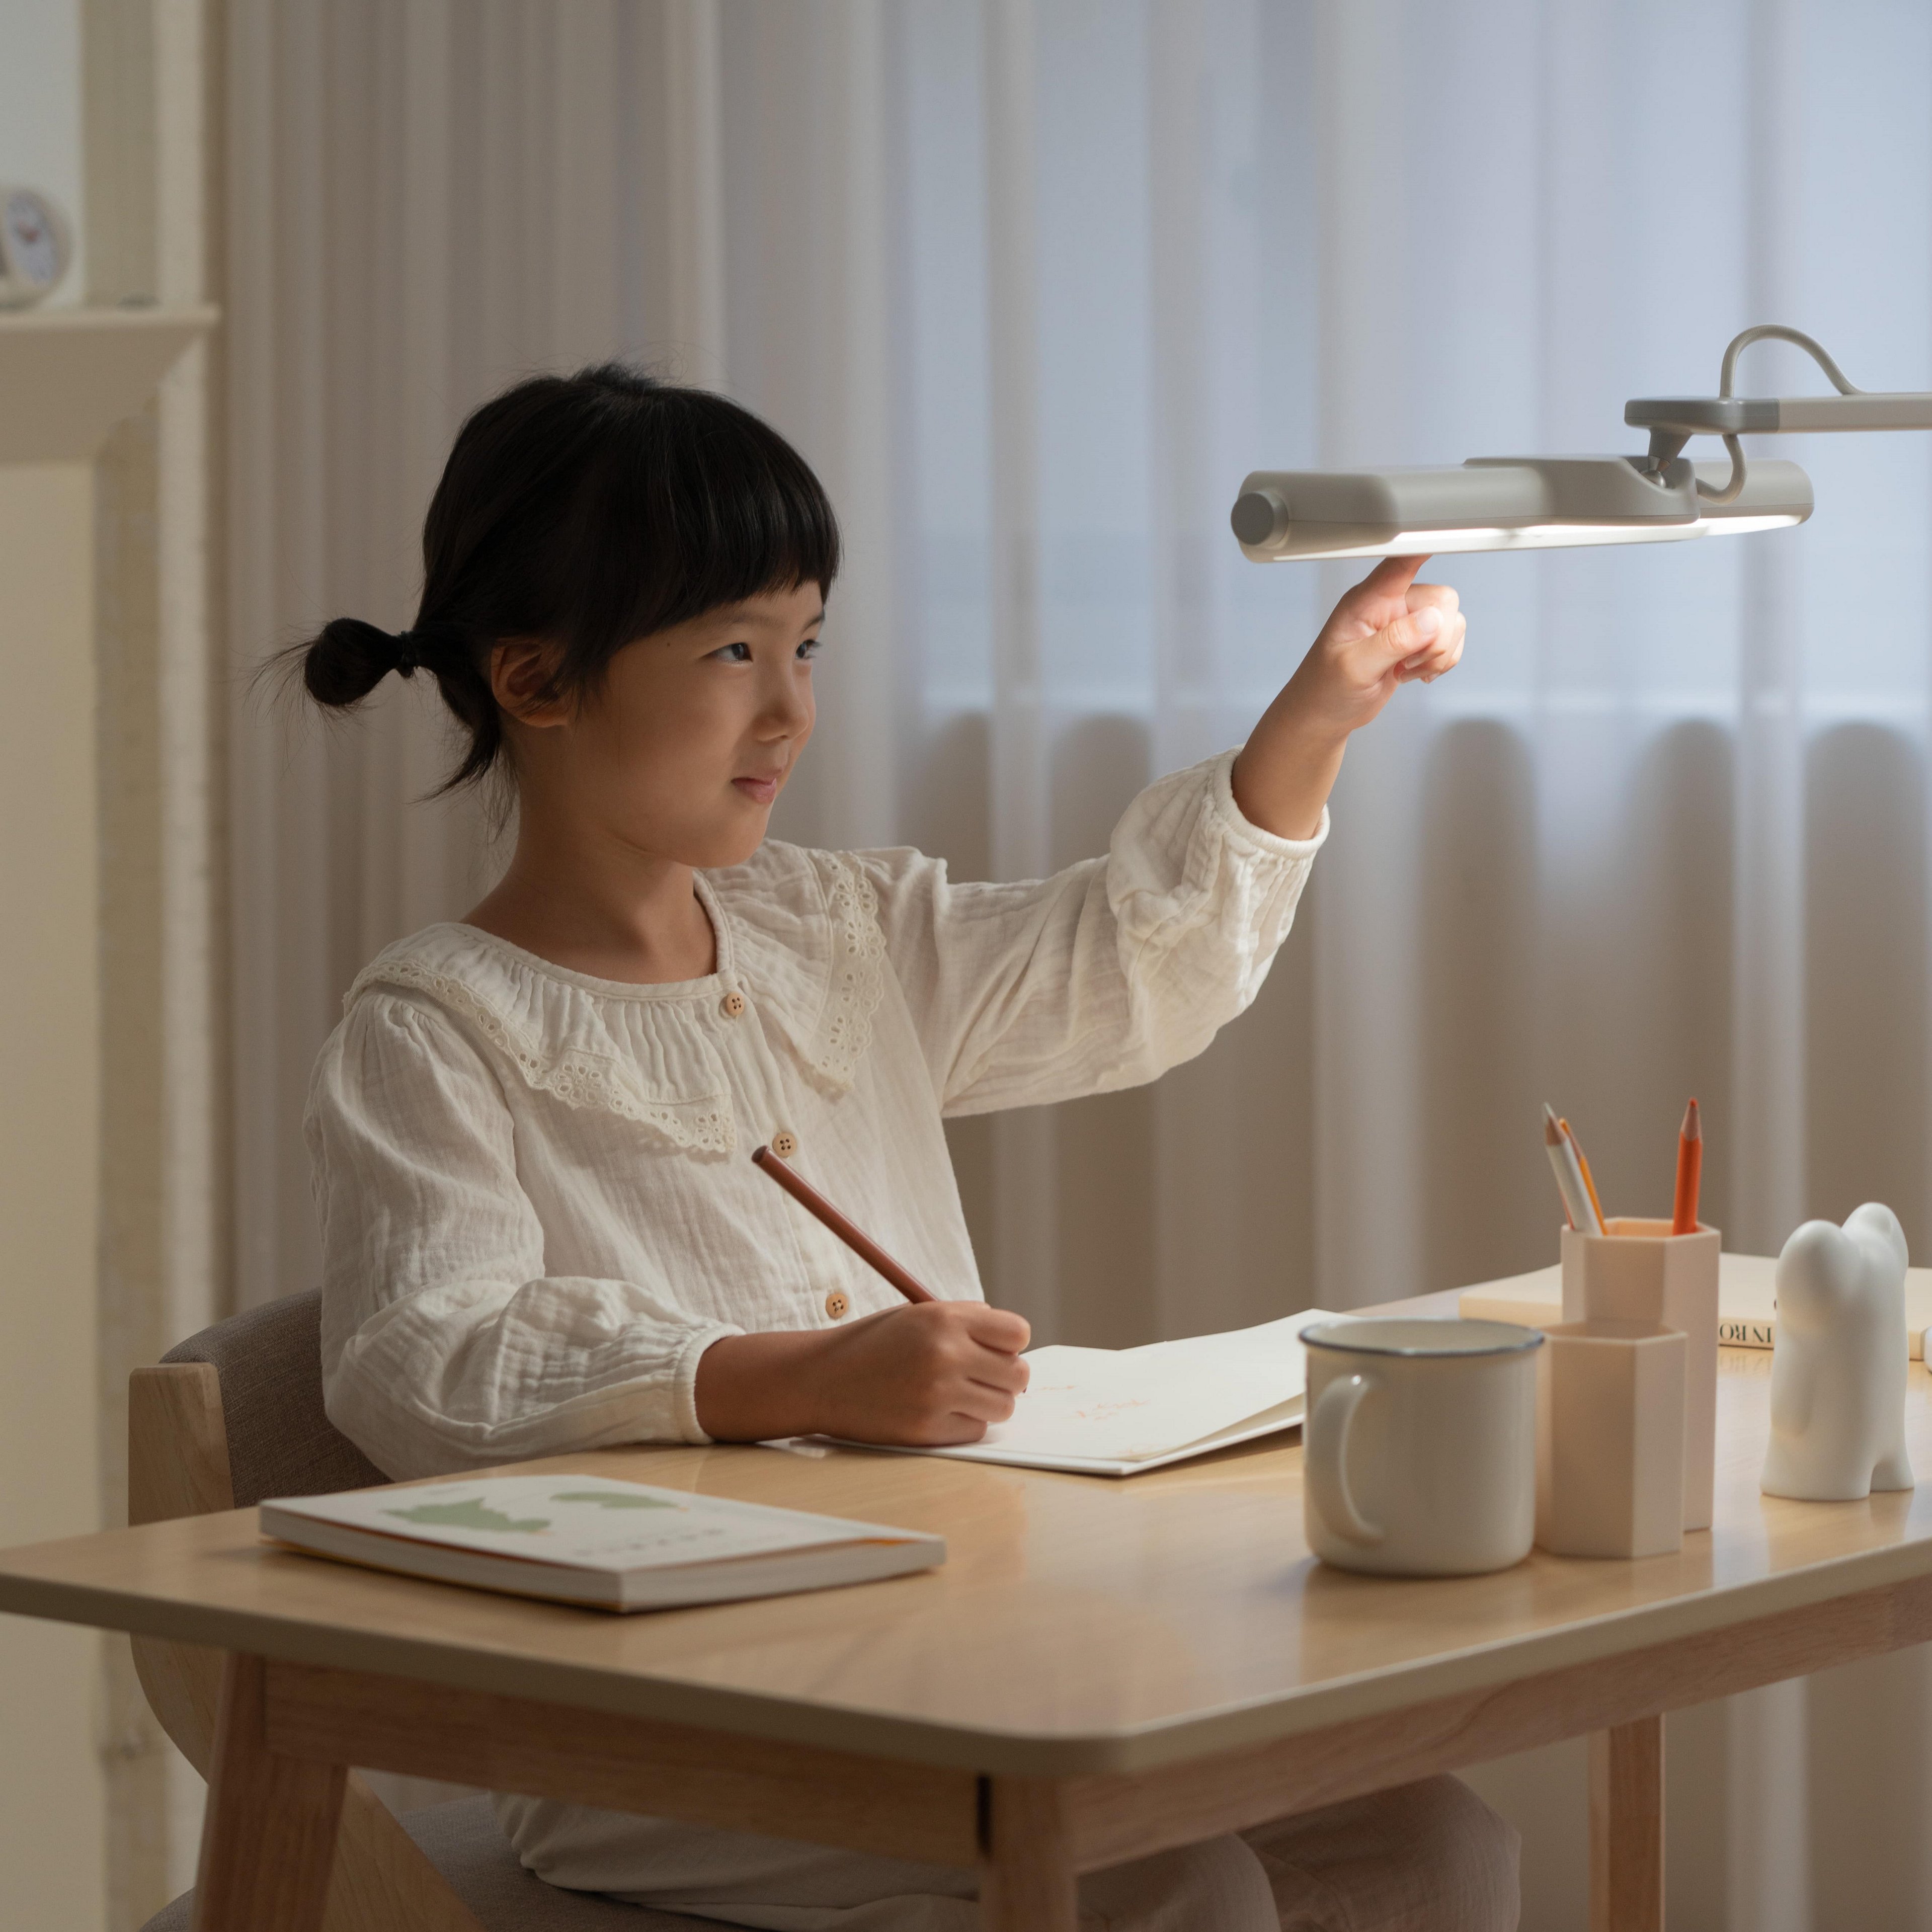 BenQ MindDuo 2 Kids Study lamp, a safe desk lamp designed for children and toddlers. Easy to operate